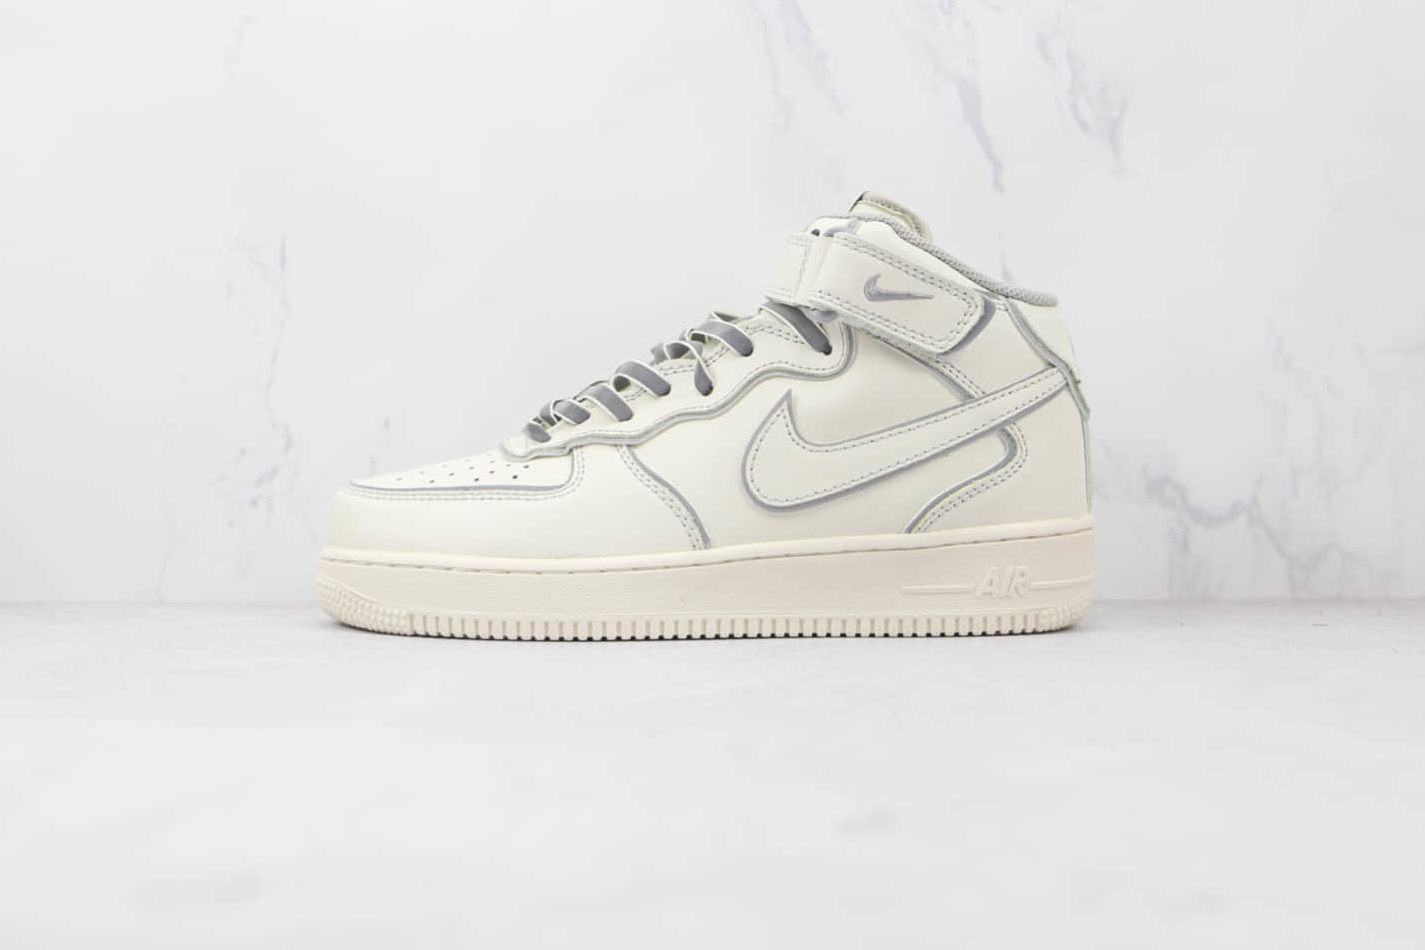 Nike Air Force 1 07 Mid Daredevil Beige Grey White AQ1218-118 - Stylish and Durable Footwear